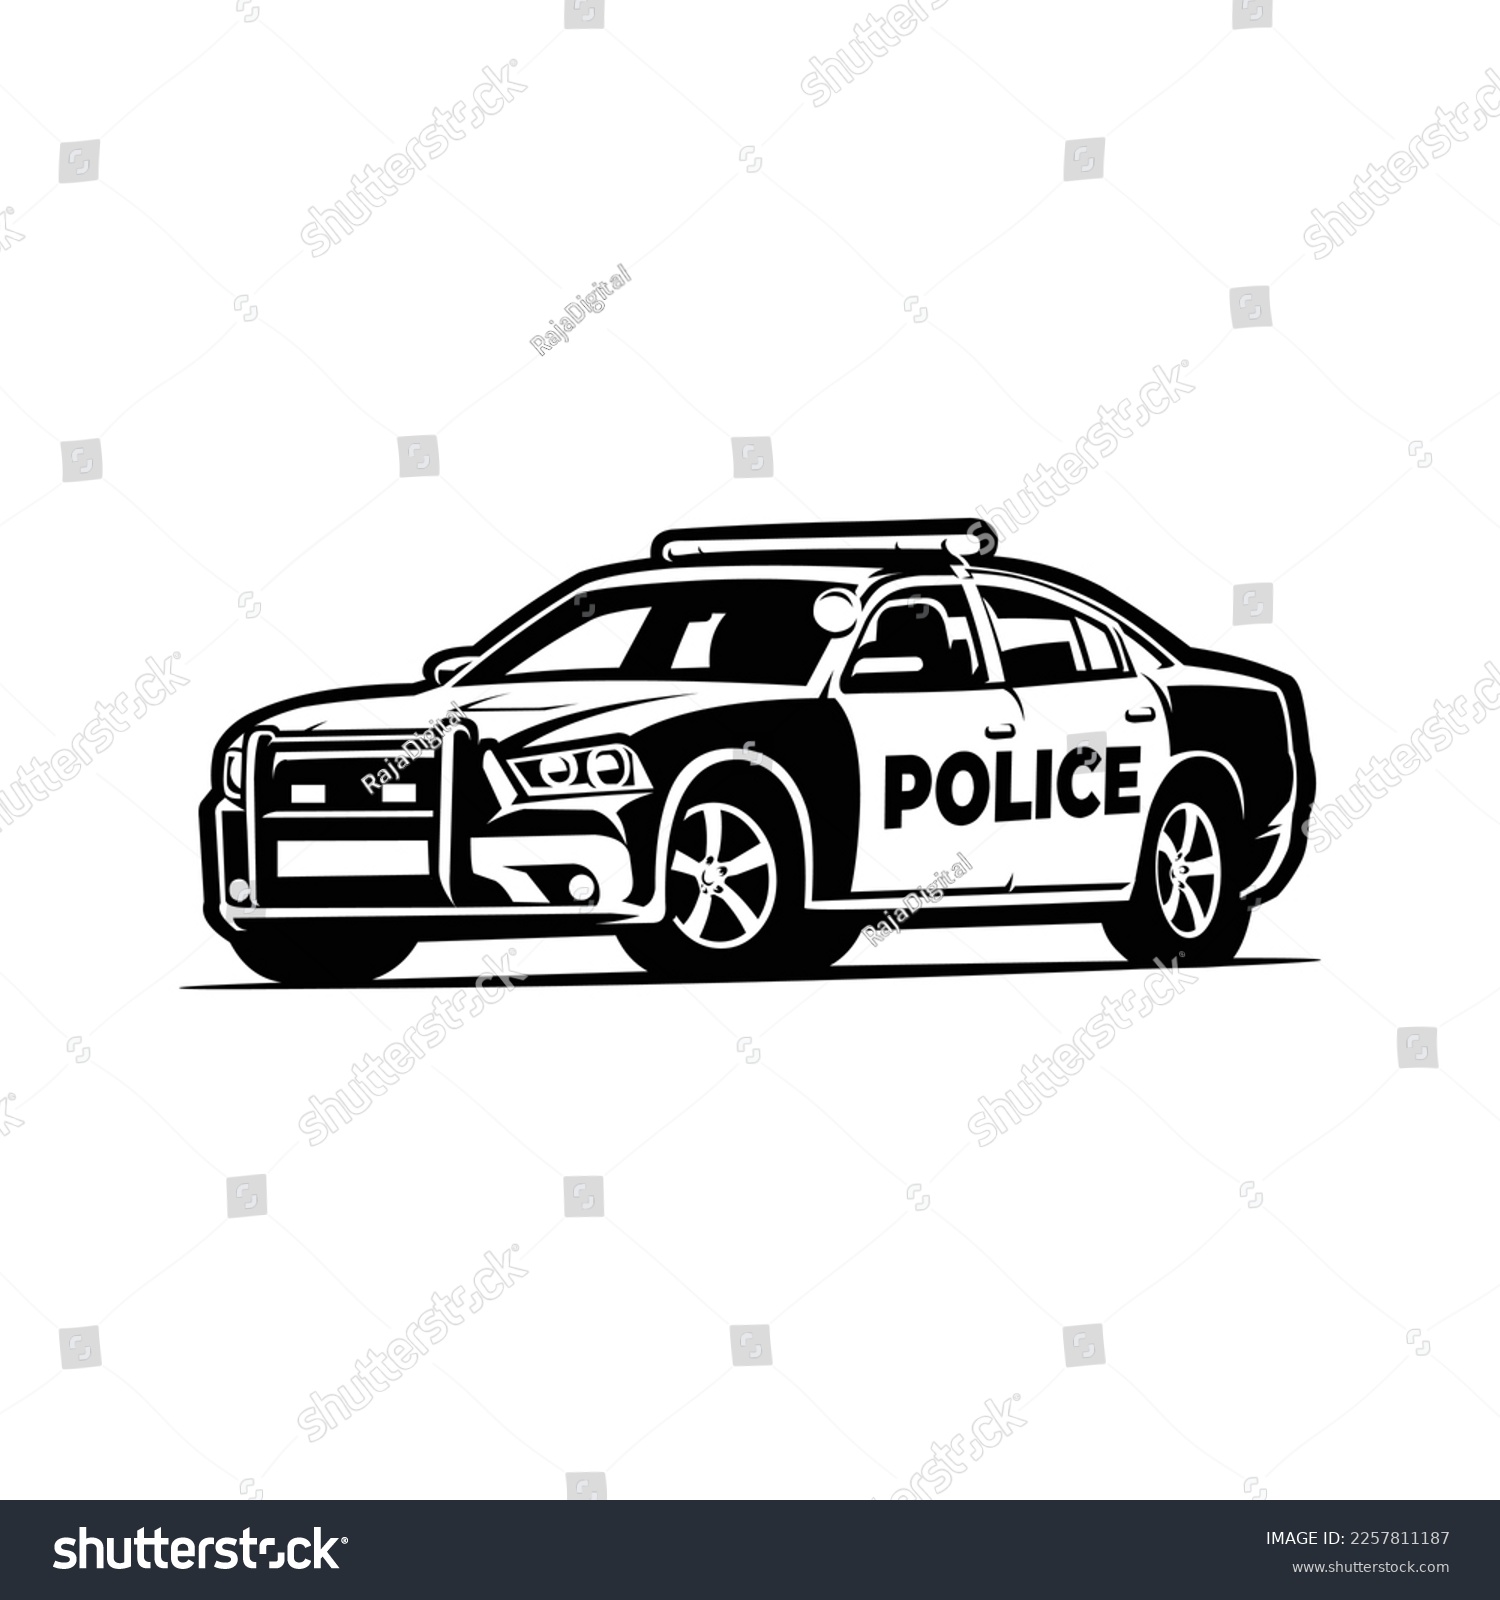 SVG of Police Car Silhouette Side View Monochrome Black and White Vector Art Isolated svg